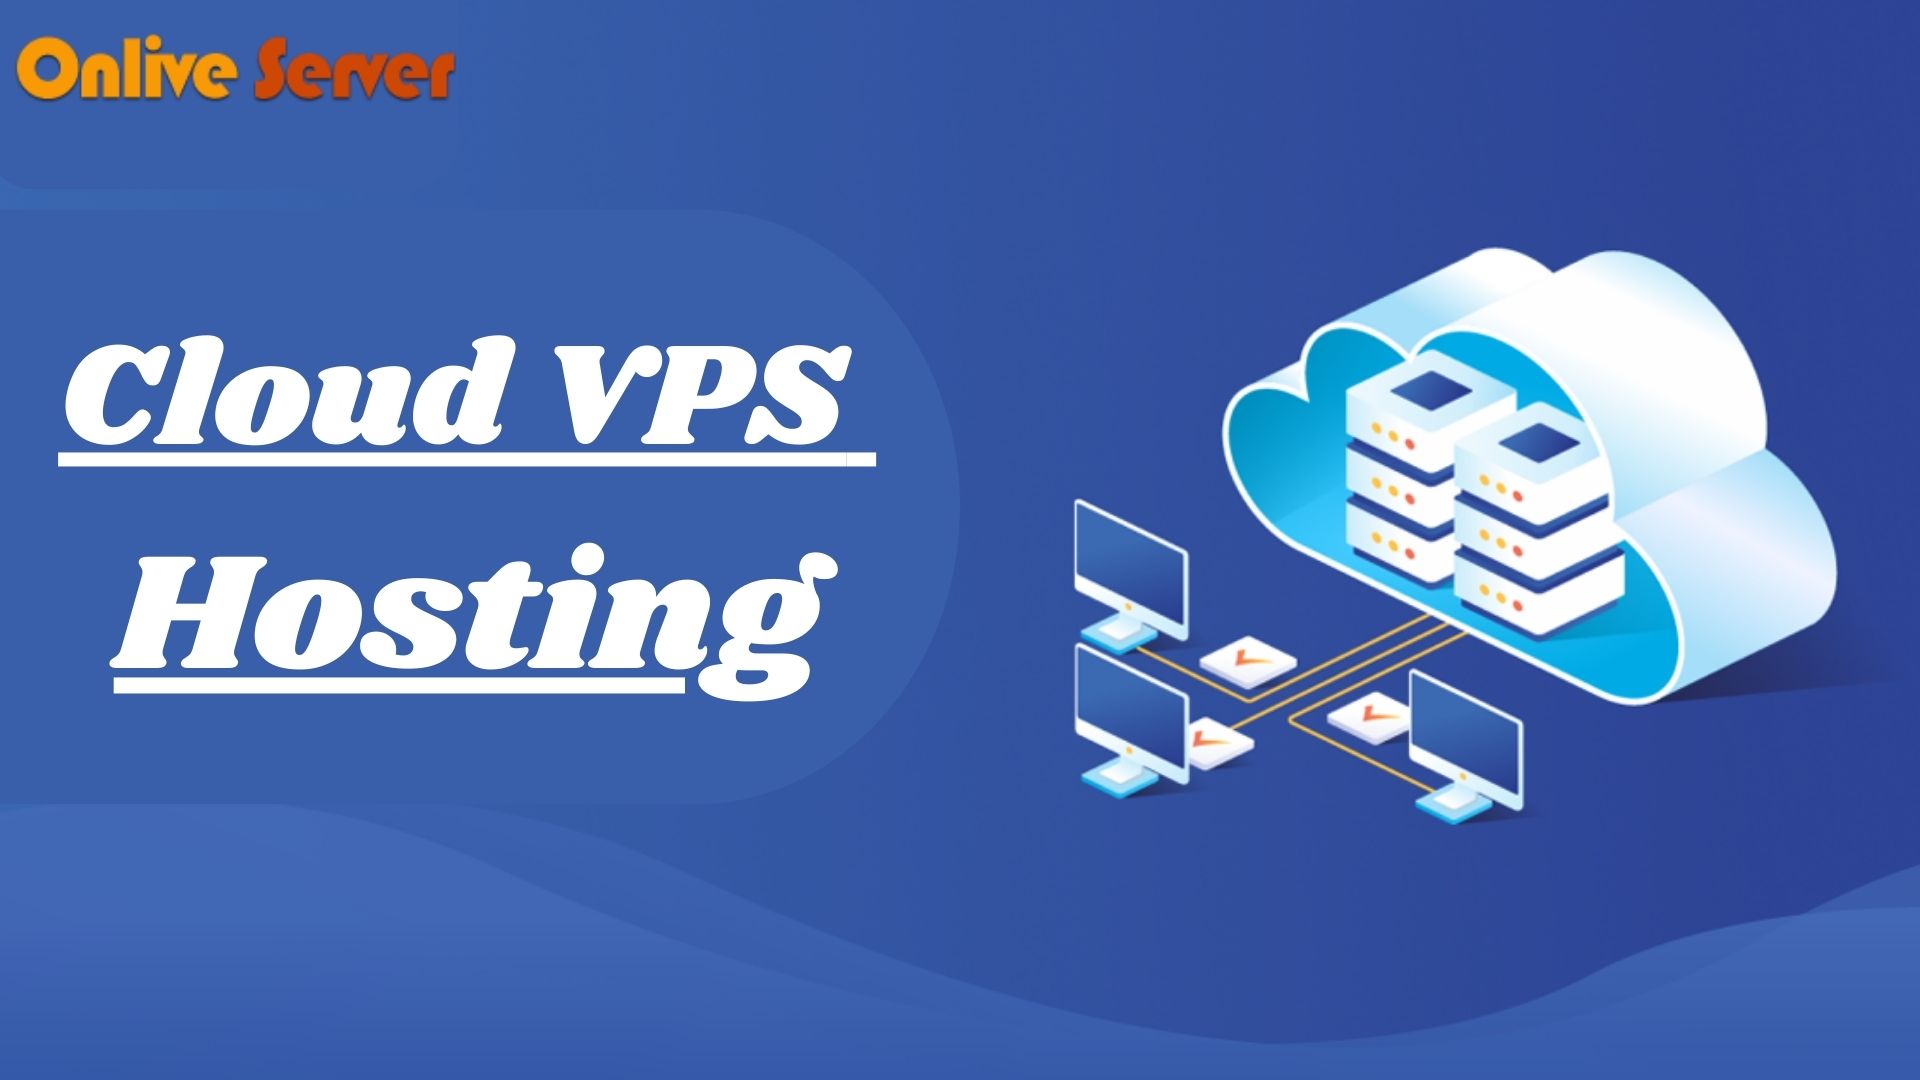 Getting an Affordable Cloud VPS Hosting by Onlive Server